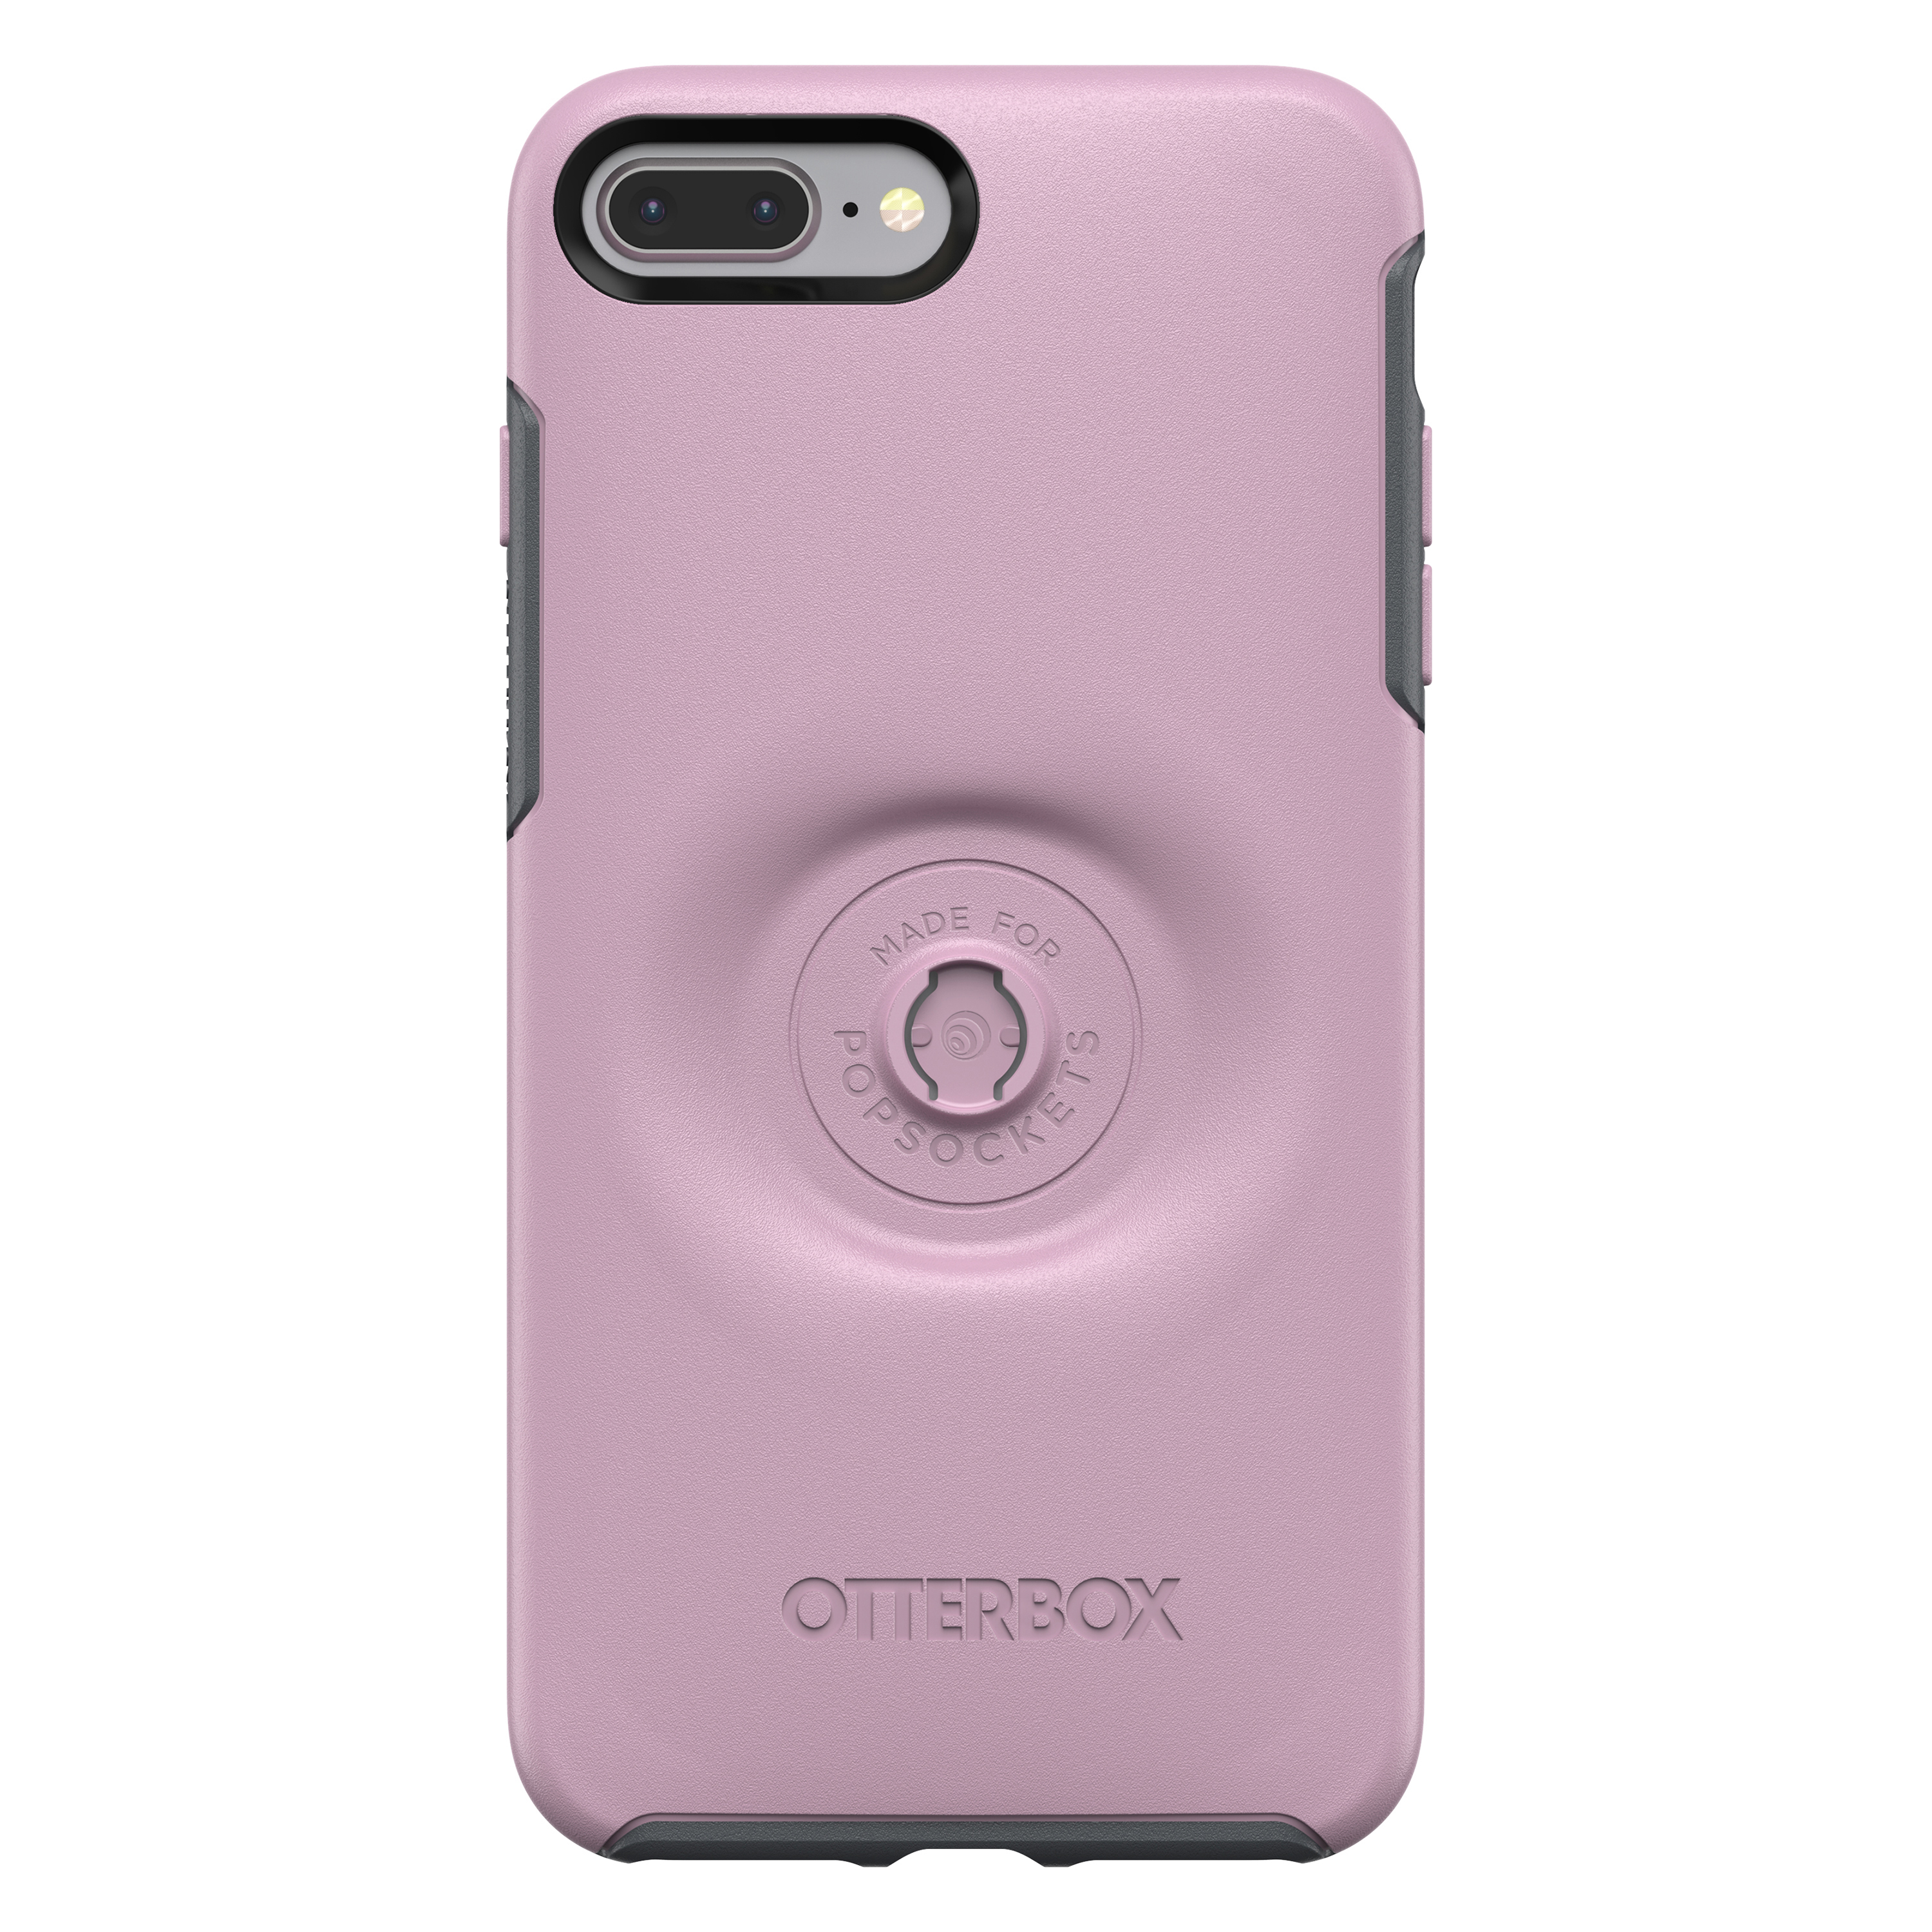 7 iPhone OTTERBOX 8 Symmetry, Pink Plus, Pop Otter iPhone Backcover, Plus, Apple, +